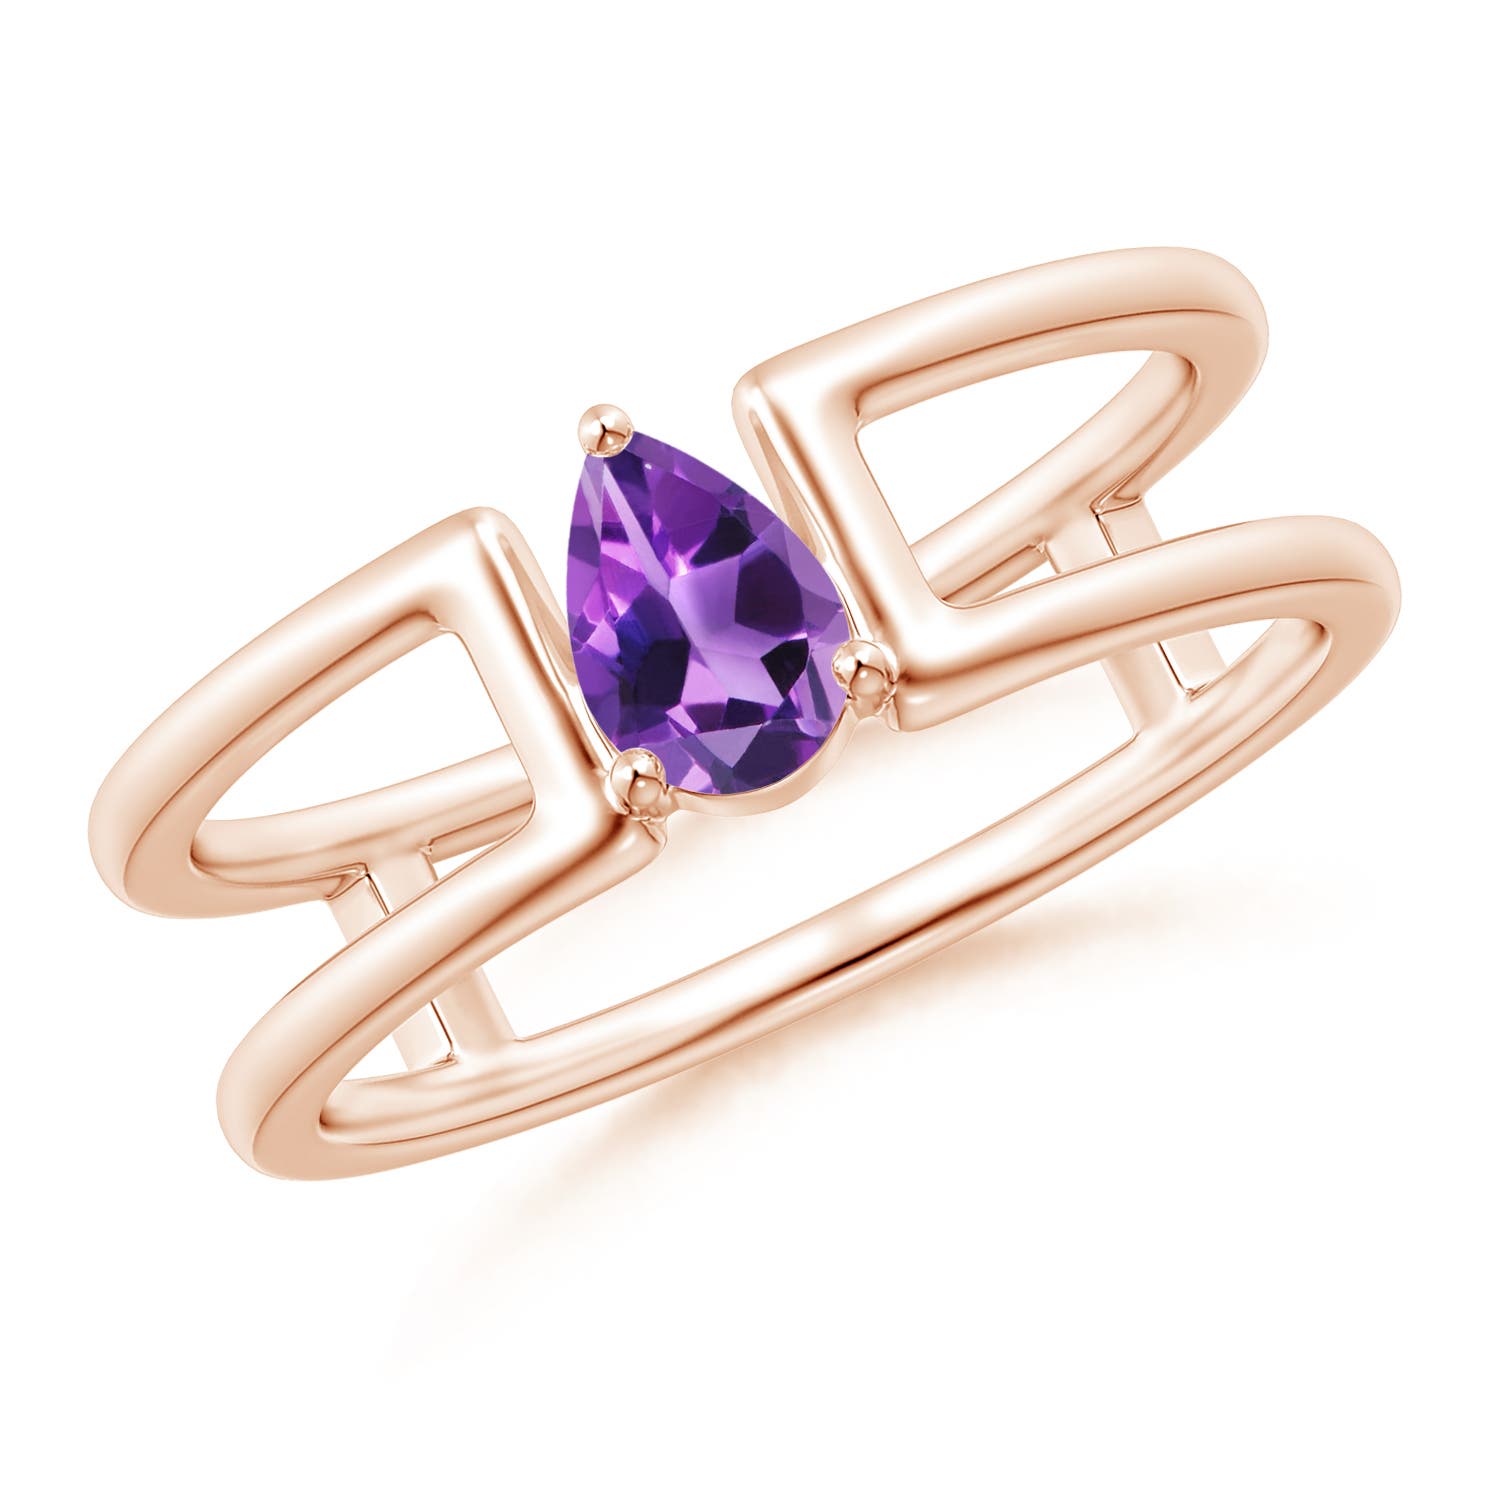 AAA - Amethyst / 0.33 CT / 14 KT Rose Gold